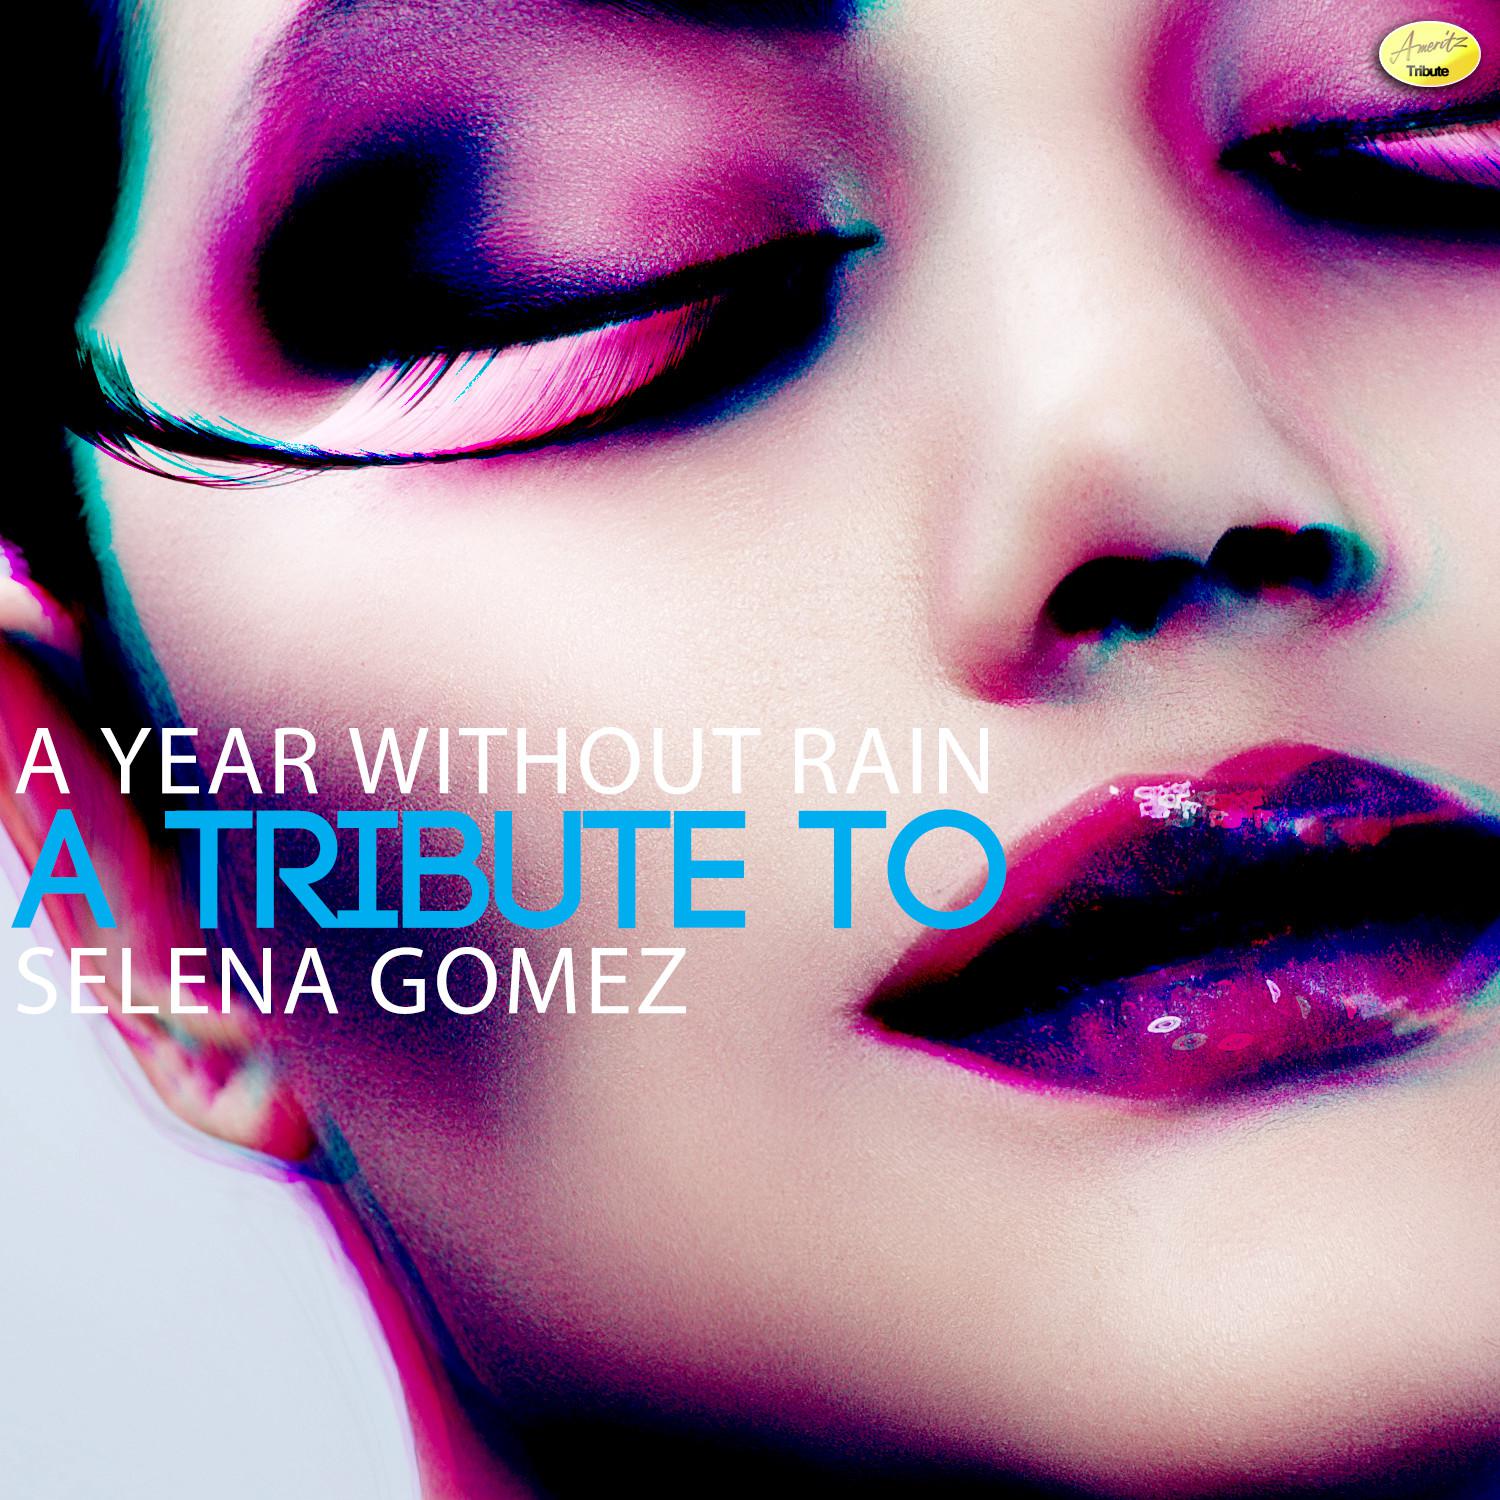 A Year Without Rain - A Tribute to Selena Gomez